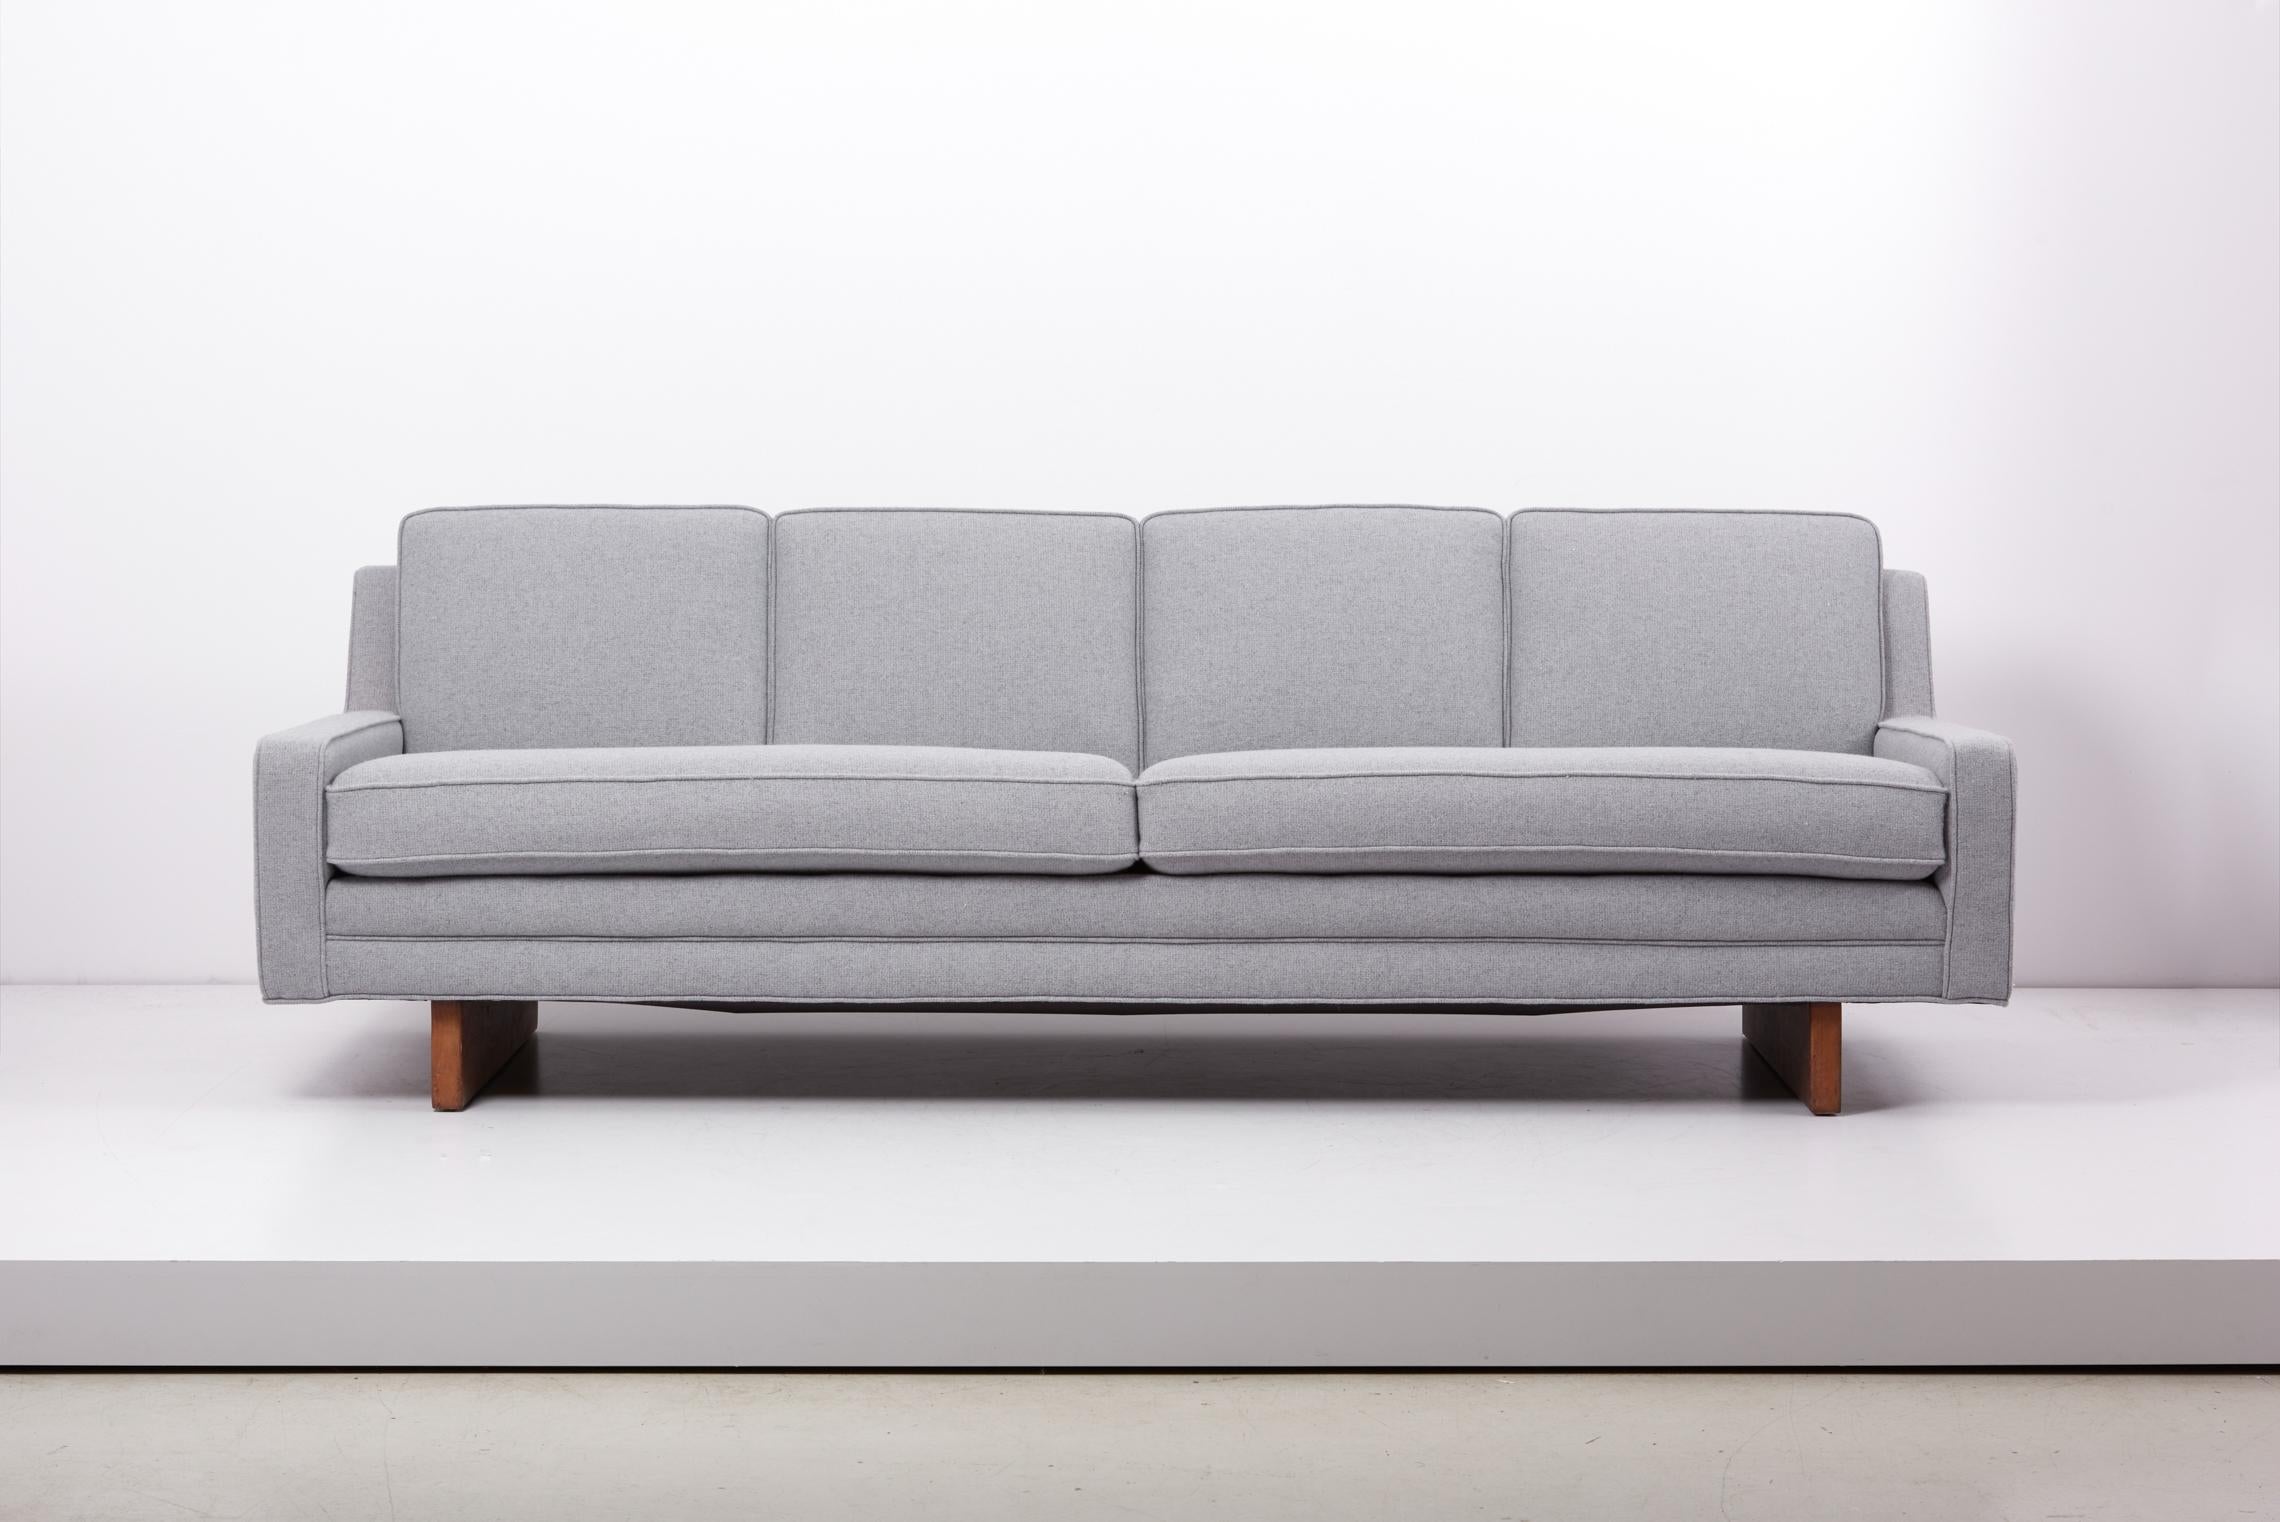 Newly upholstered 1950s sofa on wooden legs by Harvey Probber, US. Fabric by Kvadrat.